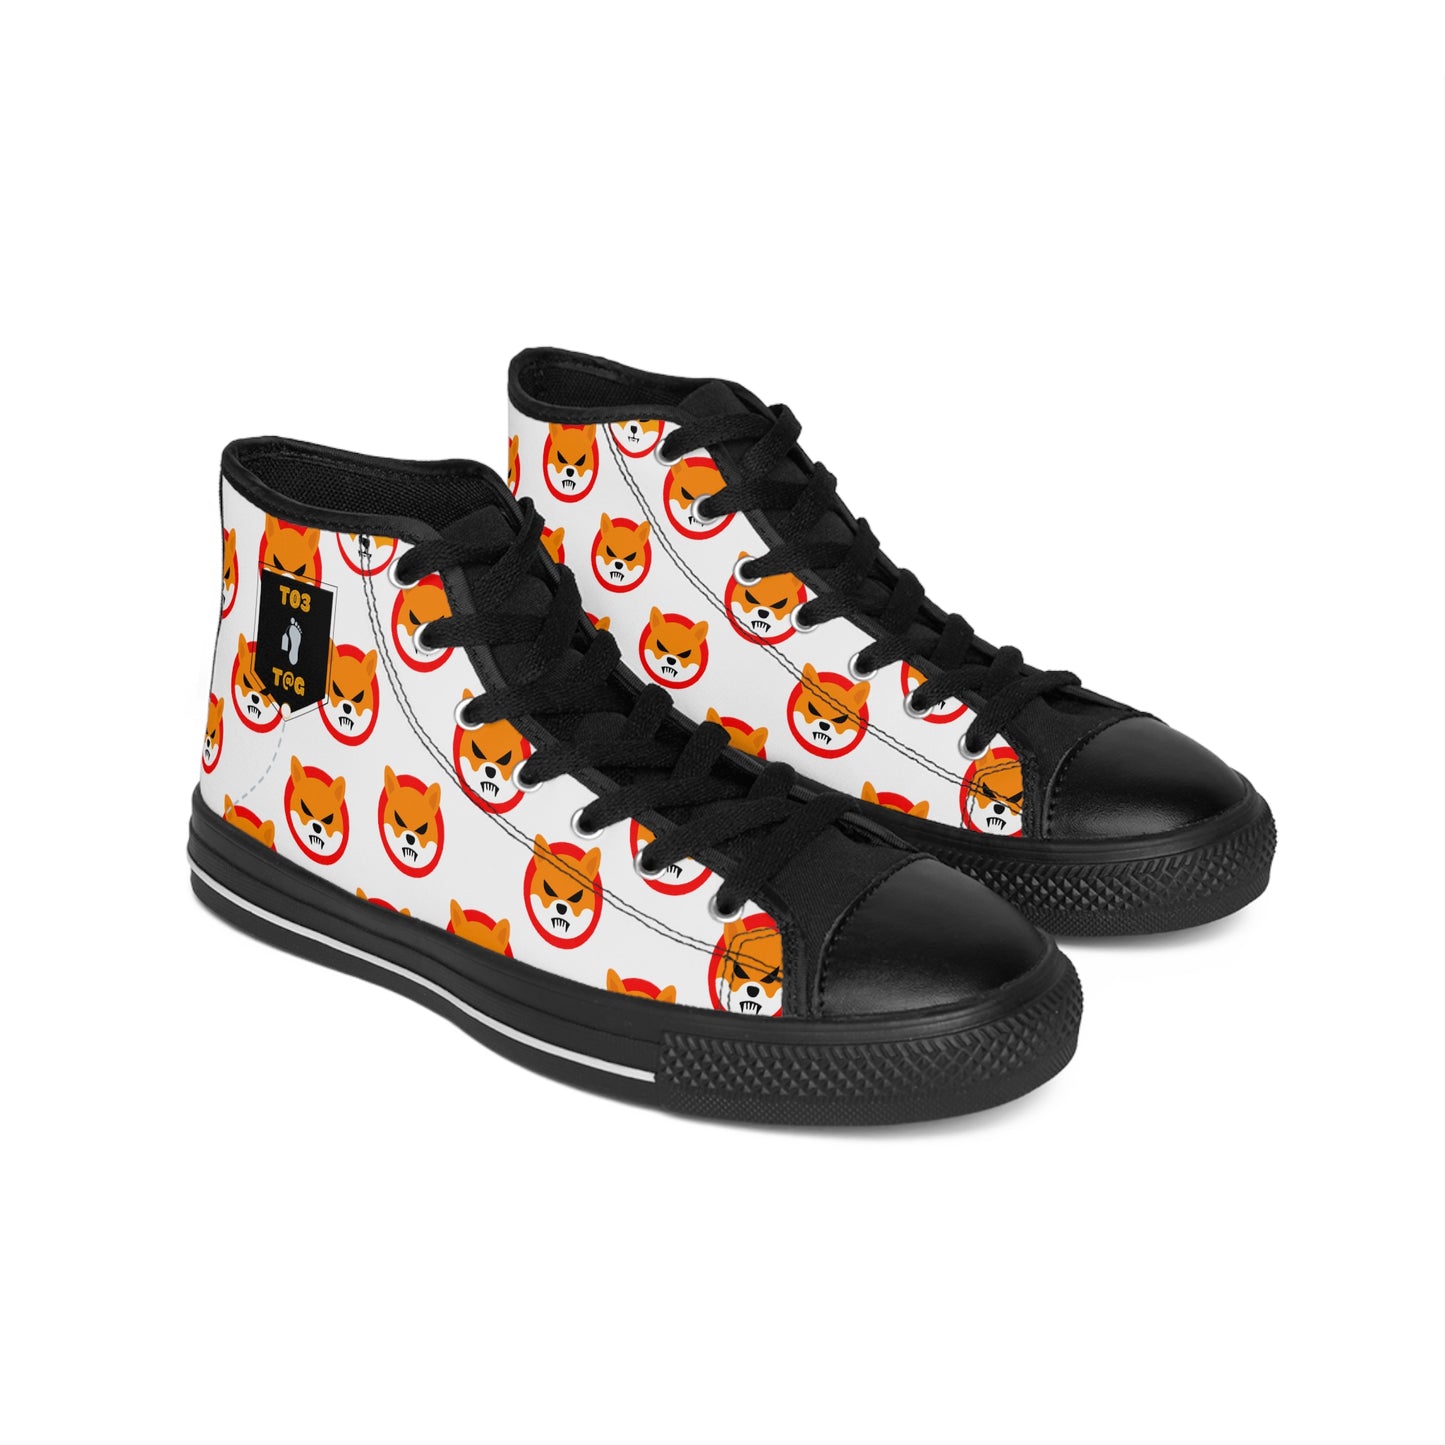 Toe Tag High-top Sneakers MAD SHIB